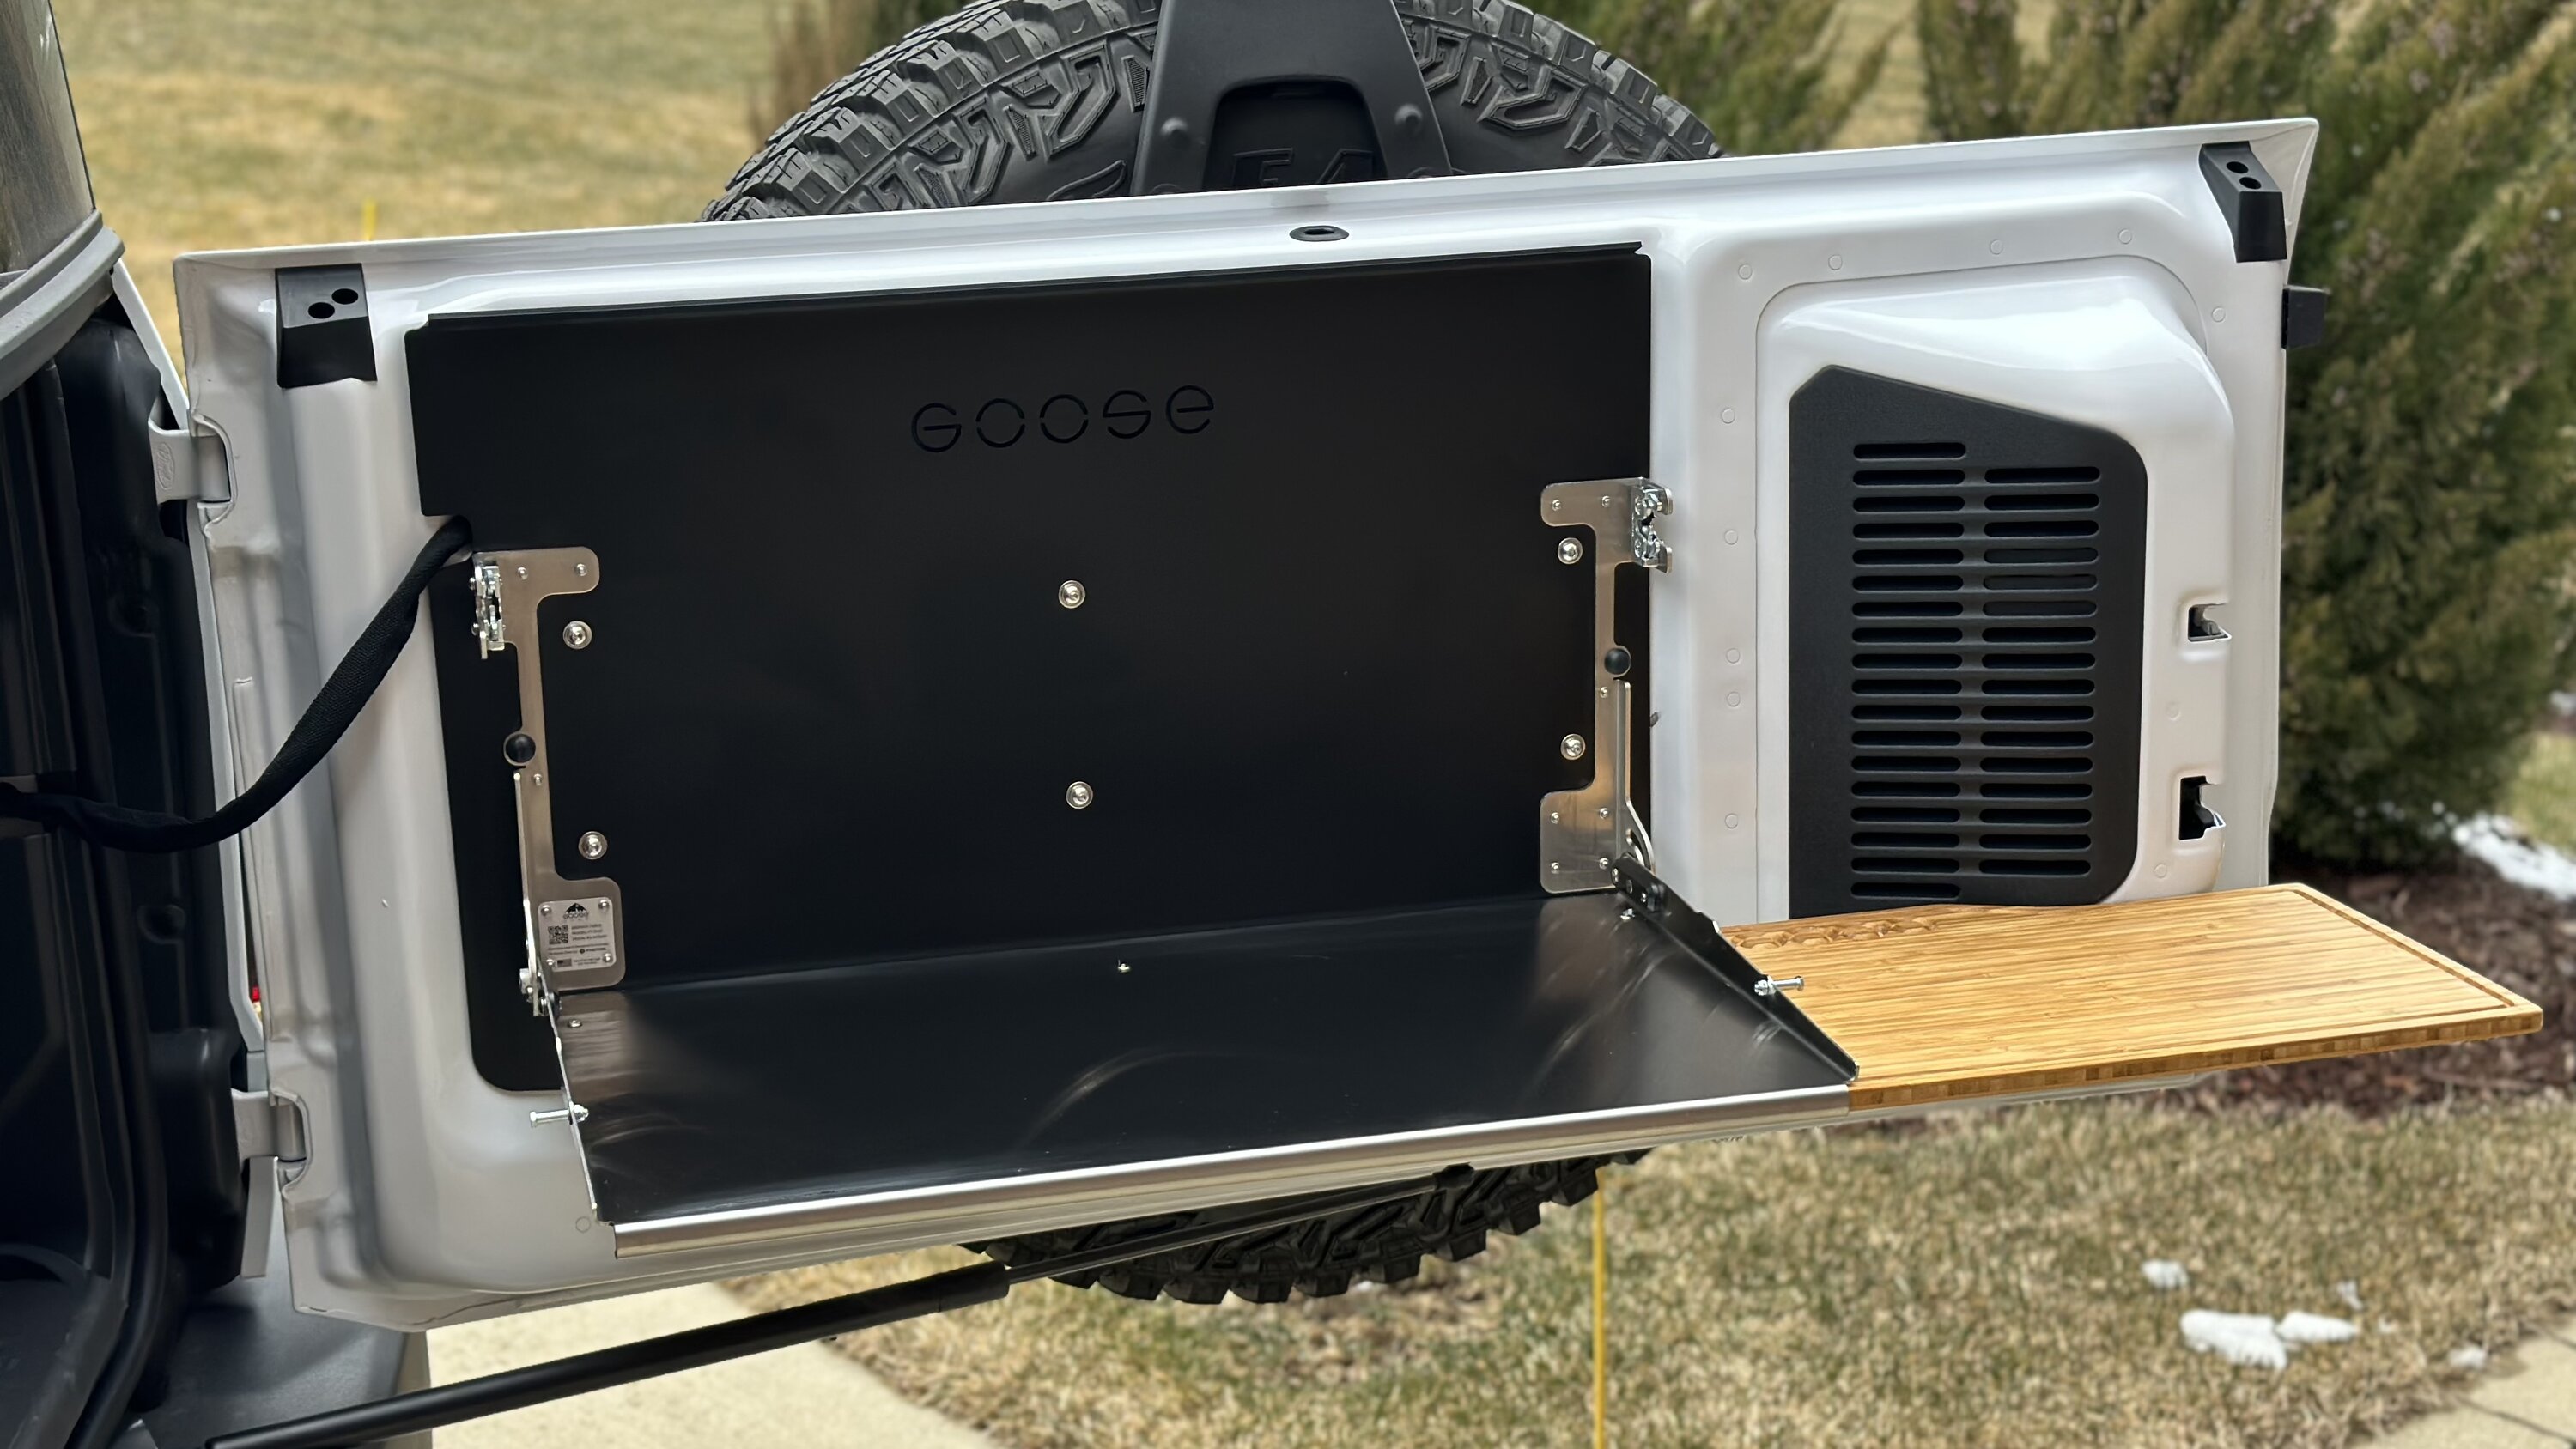 Ford Bronco Goose Gear Stainless Steel Tailgate Table - install video / review - details on drilling 2CACA526-29FC-46F1-B8A3-2D0C3BFD17A6